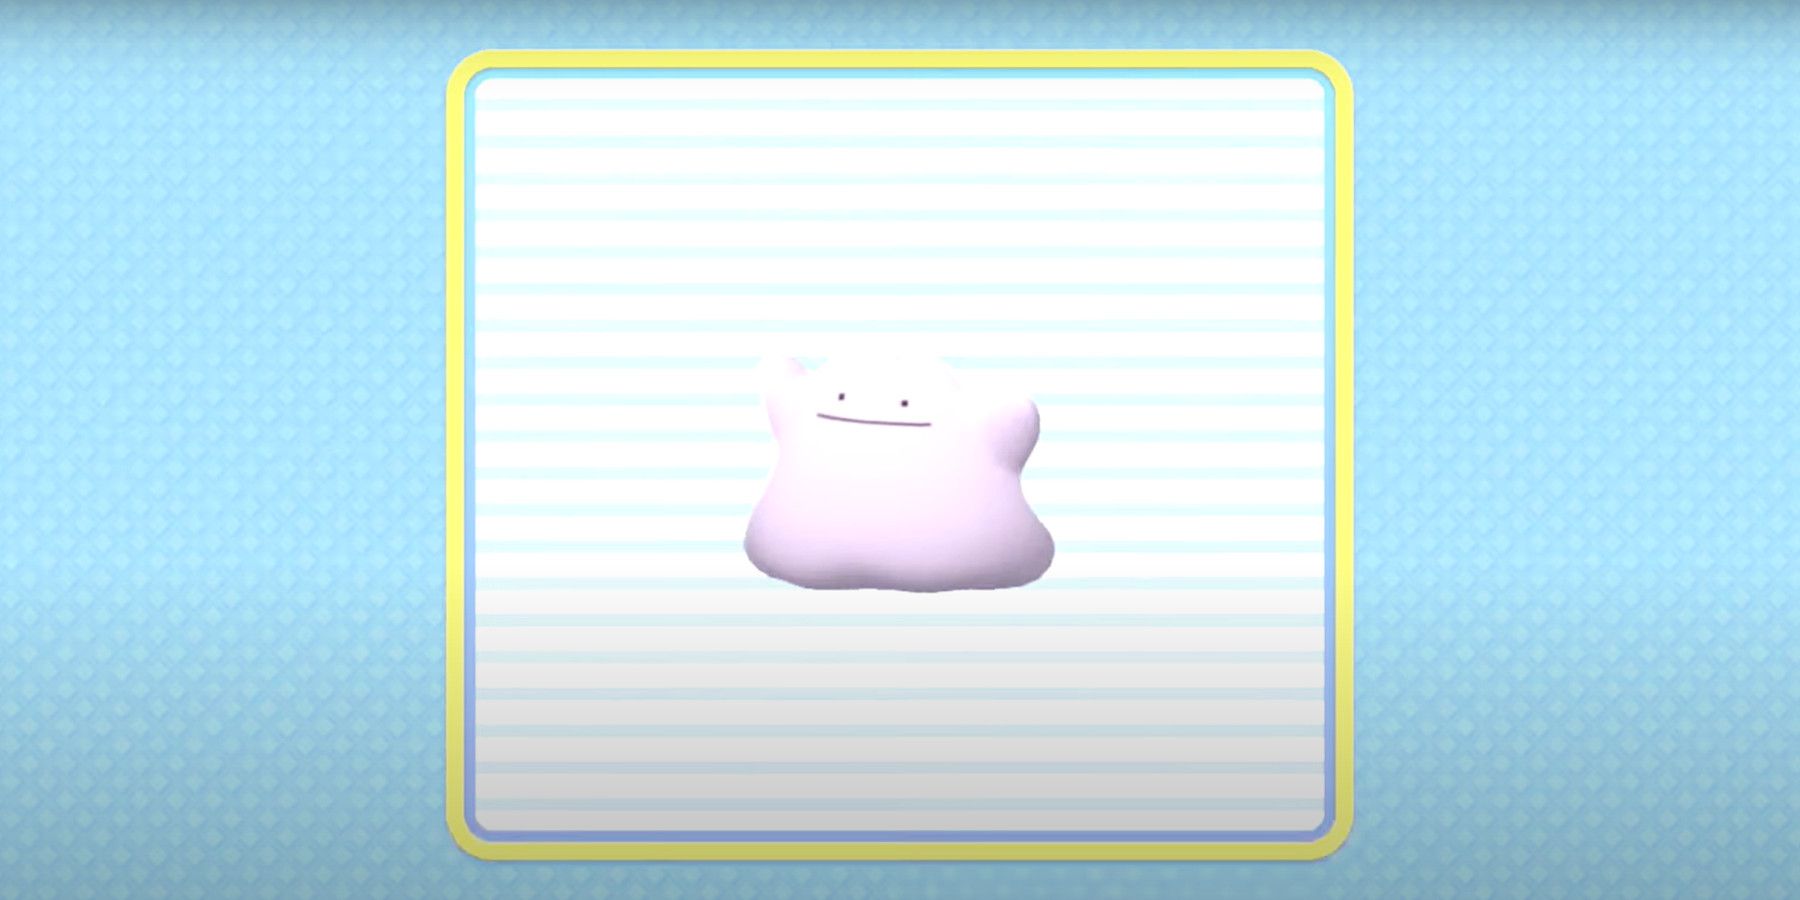 Pokemon Brilliant Diamond & Shining Pearl: How to Get a Foreign Ditto